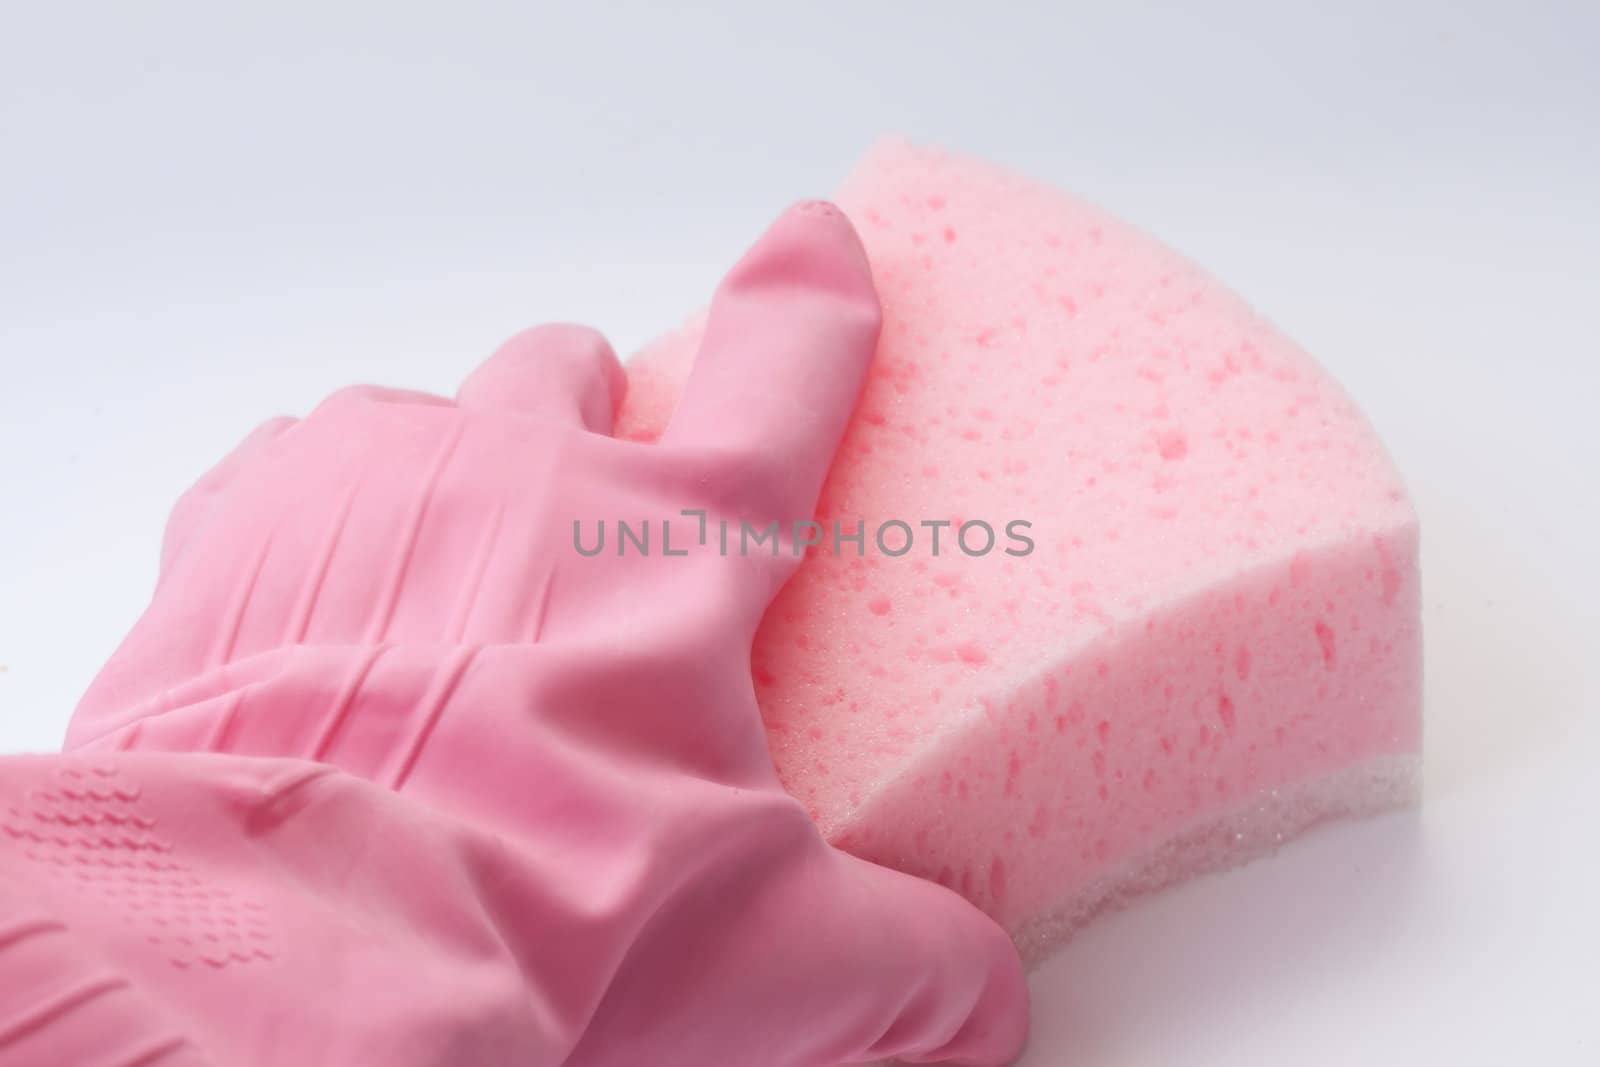 Hand in a pink rubber glove holding a pink sponge